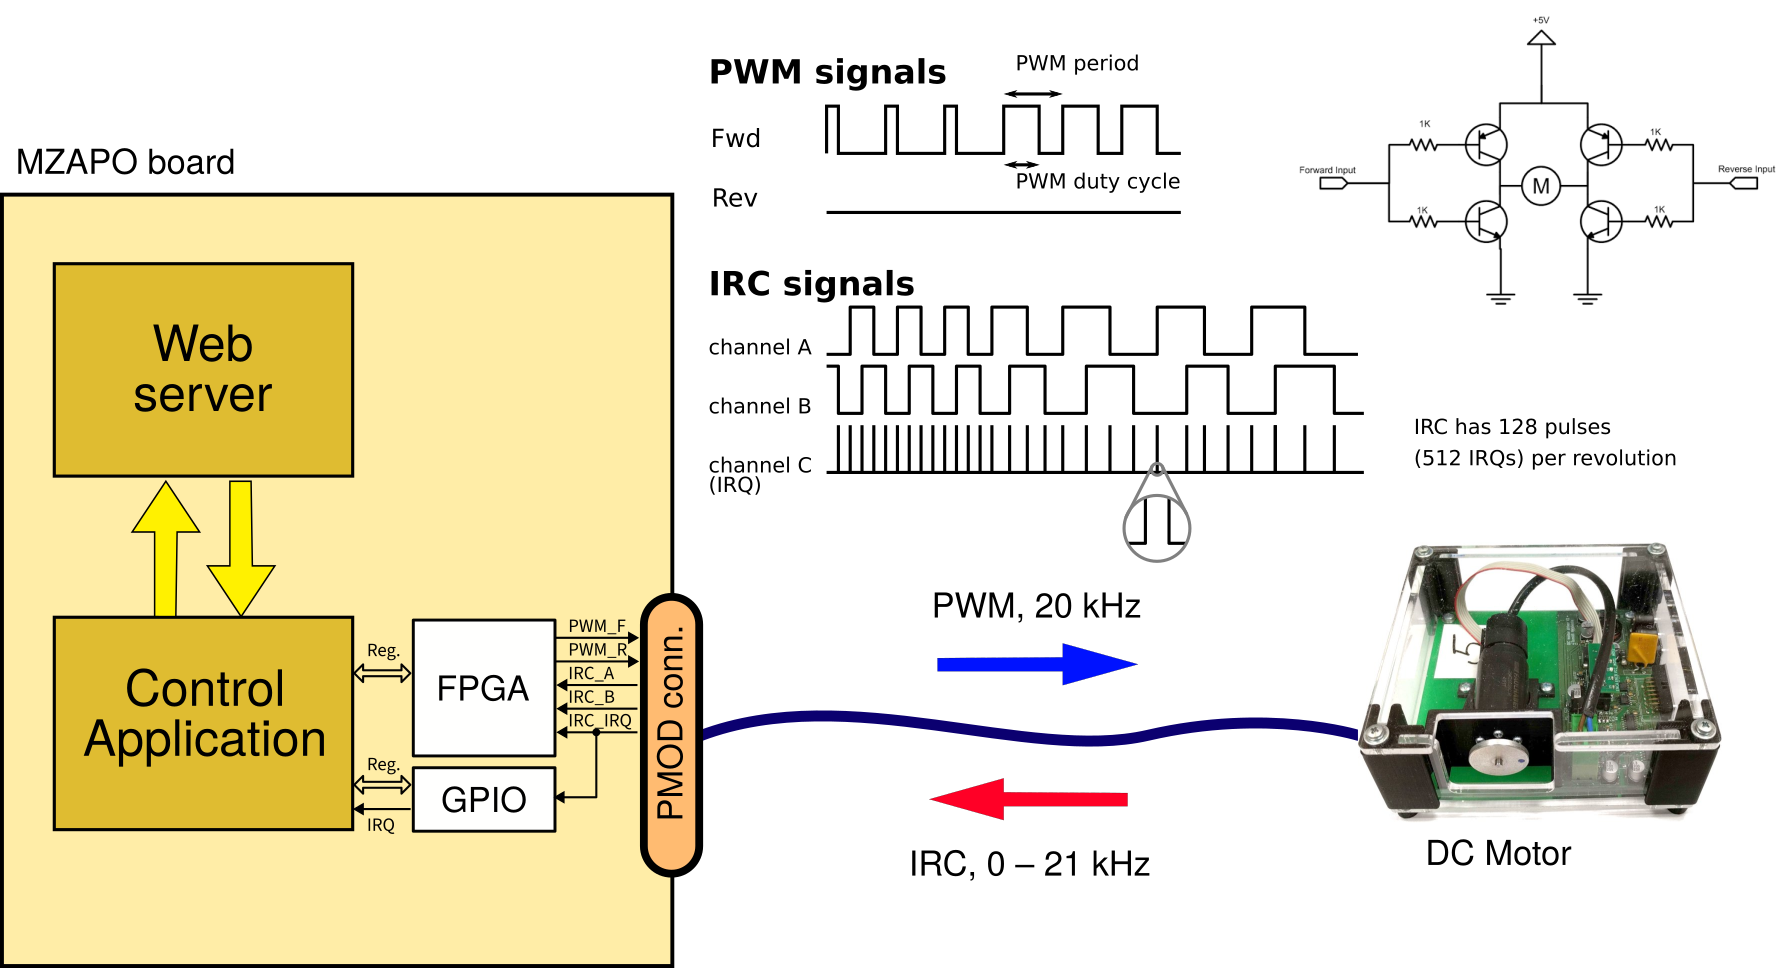 Details about connection between the motor and the board